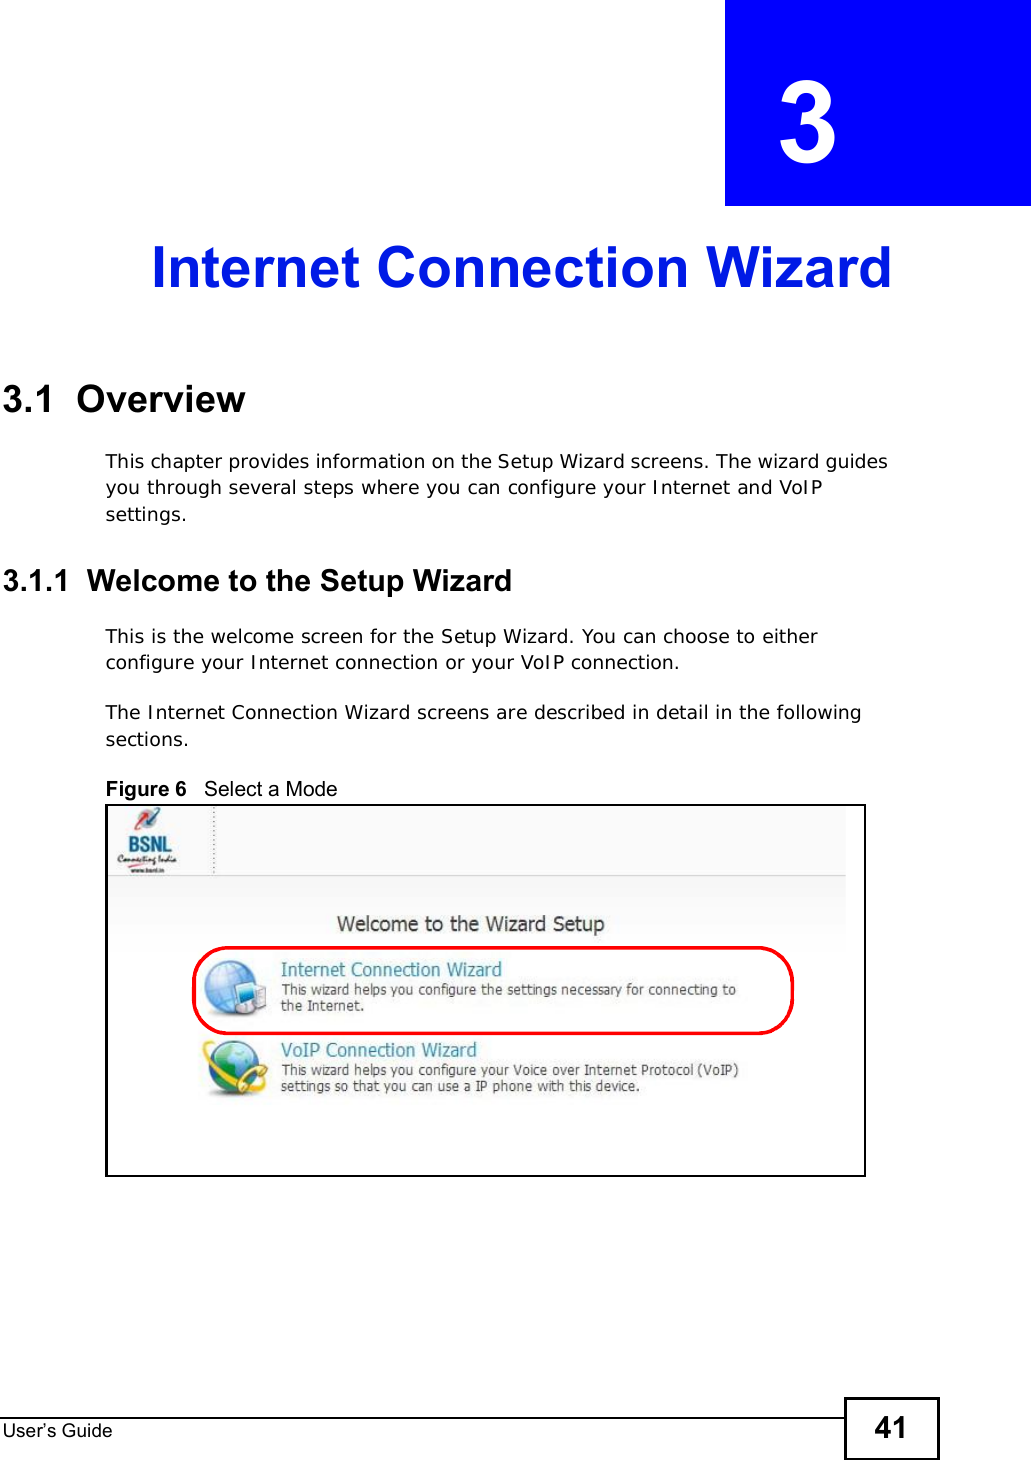 User s Guide 41CHAPTER  3 Internet Connection Wizard3.1  OverviewThis chapter provides information on the Setup Wizard screens. The wizard guides you through several steps where you can configure your Internet and VoIP settings.3.1.1  Welcome to the Setup WizardThis is the welcome screen for the Setup Wizard. You can choose to either configure your Internet connection or your VoIP connection.The Internet Connection Wizard screens are described in detail in the following sections.Figure 6   Select a Mode